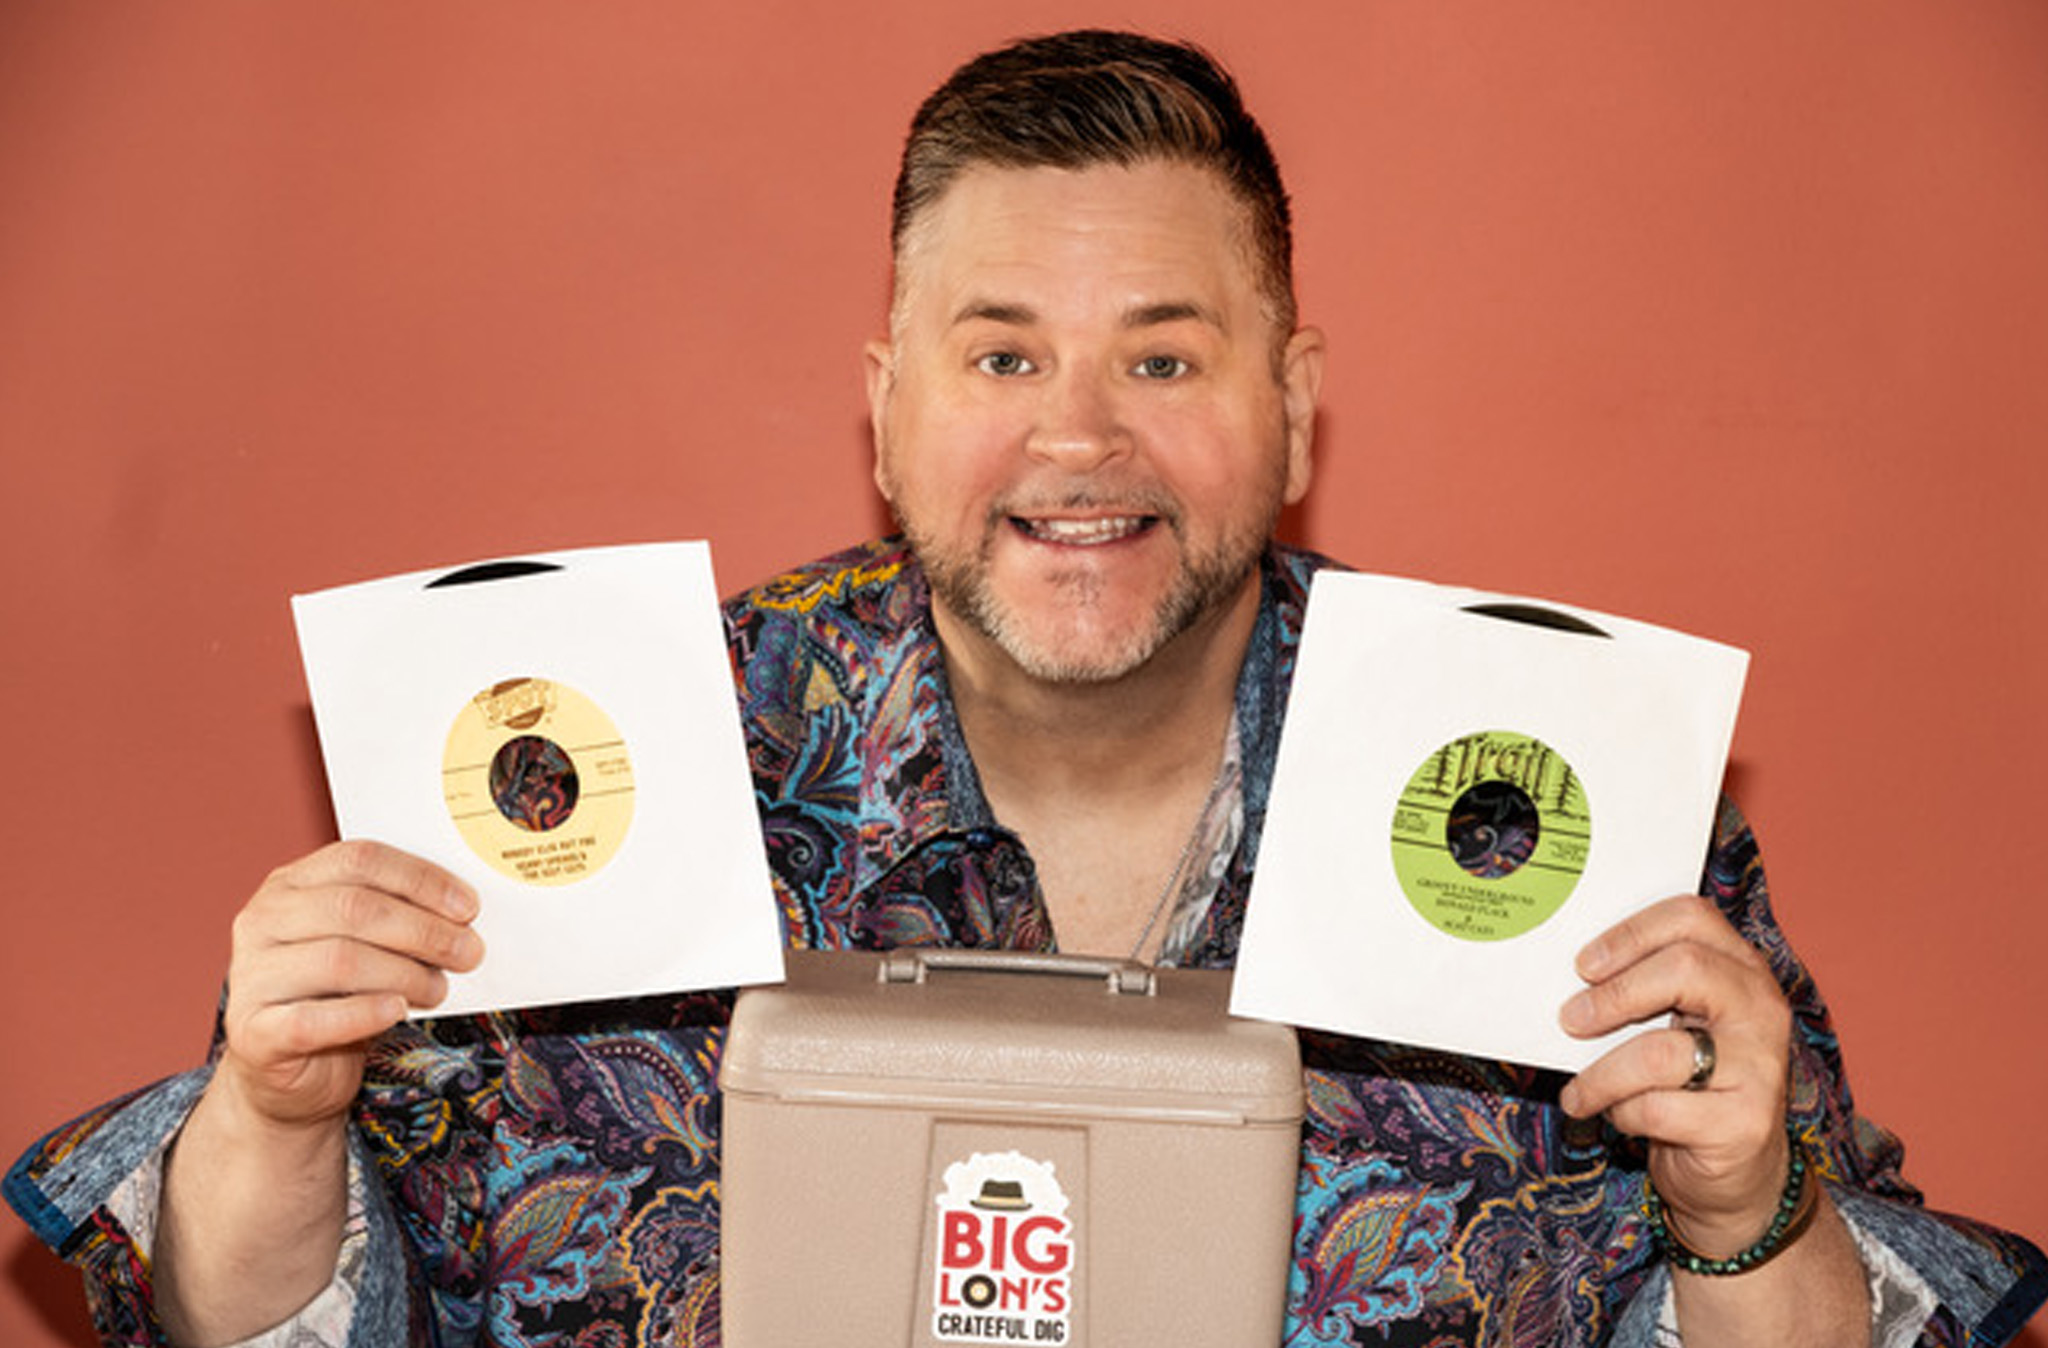 Photo of "Big Lon" holding up two 45 rpm records.